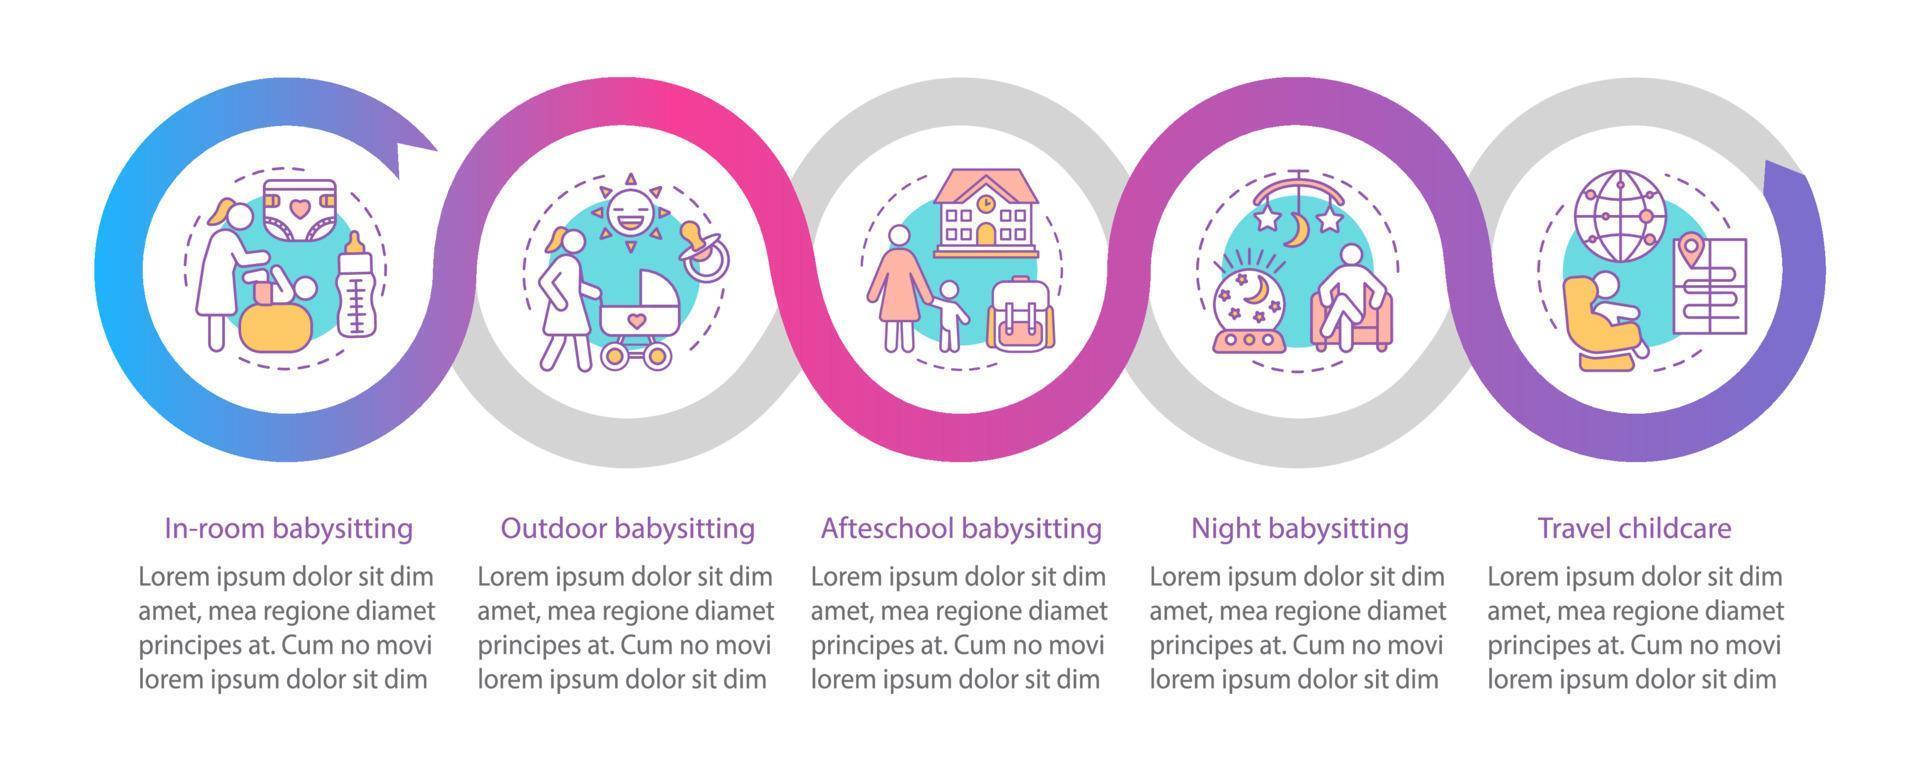 Hotel babysitting service vector infographic template. Business presentation design elements. Night, travel babysitter. Data visualization with steps, options. Process timeline chart. Workflow layout